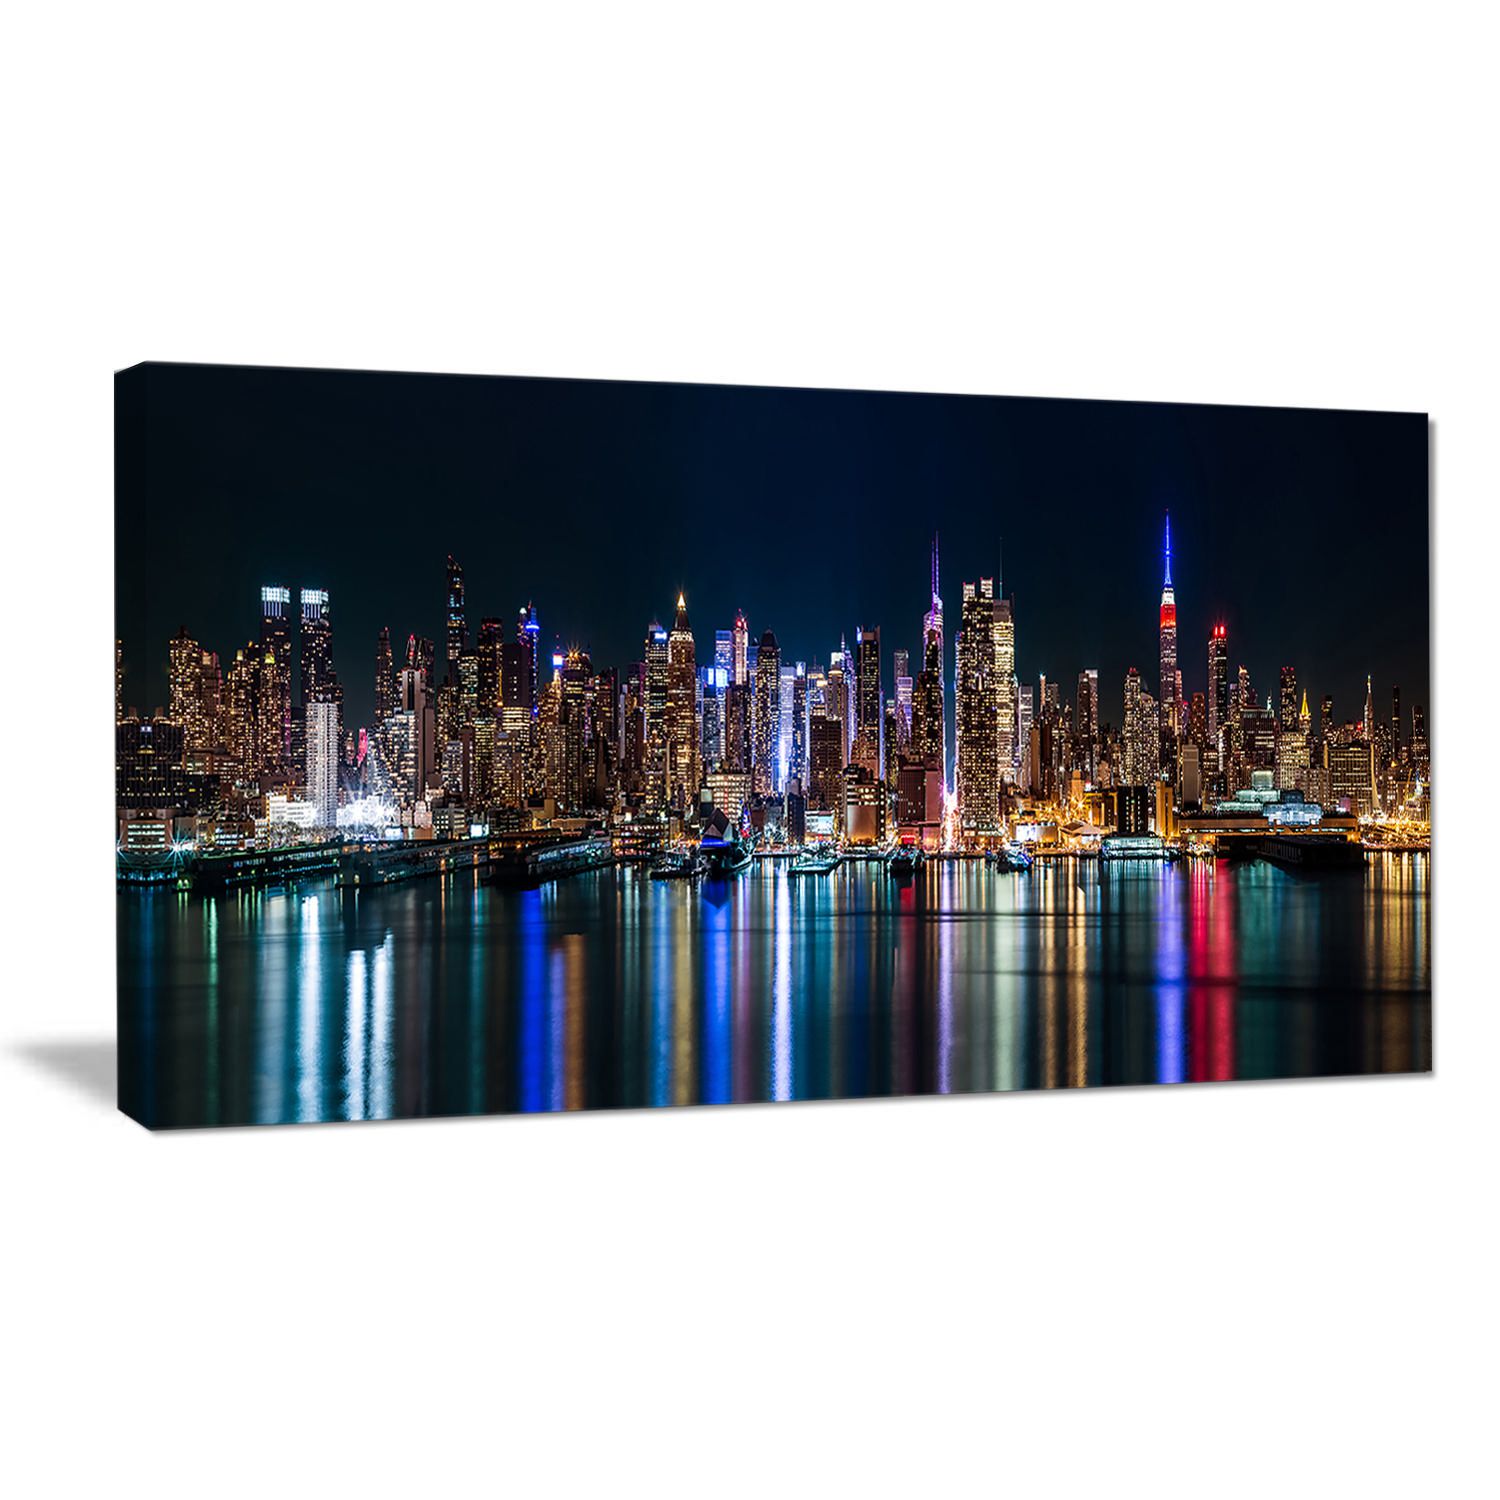 70x28-6 Equal Panels Designart PT14361-70-28-6P Silhouettes of Manhattan Panorama-Extra Large Cityscape Wall Art on Canvas 